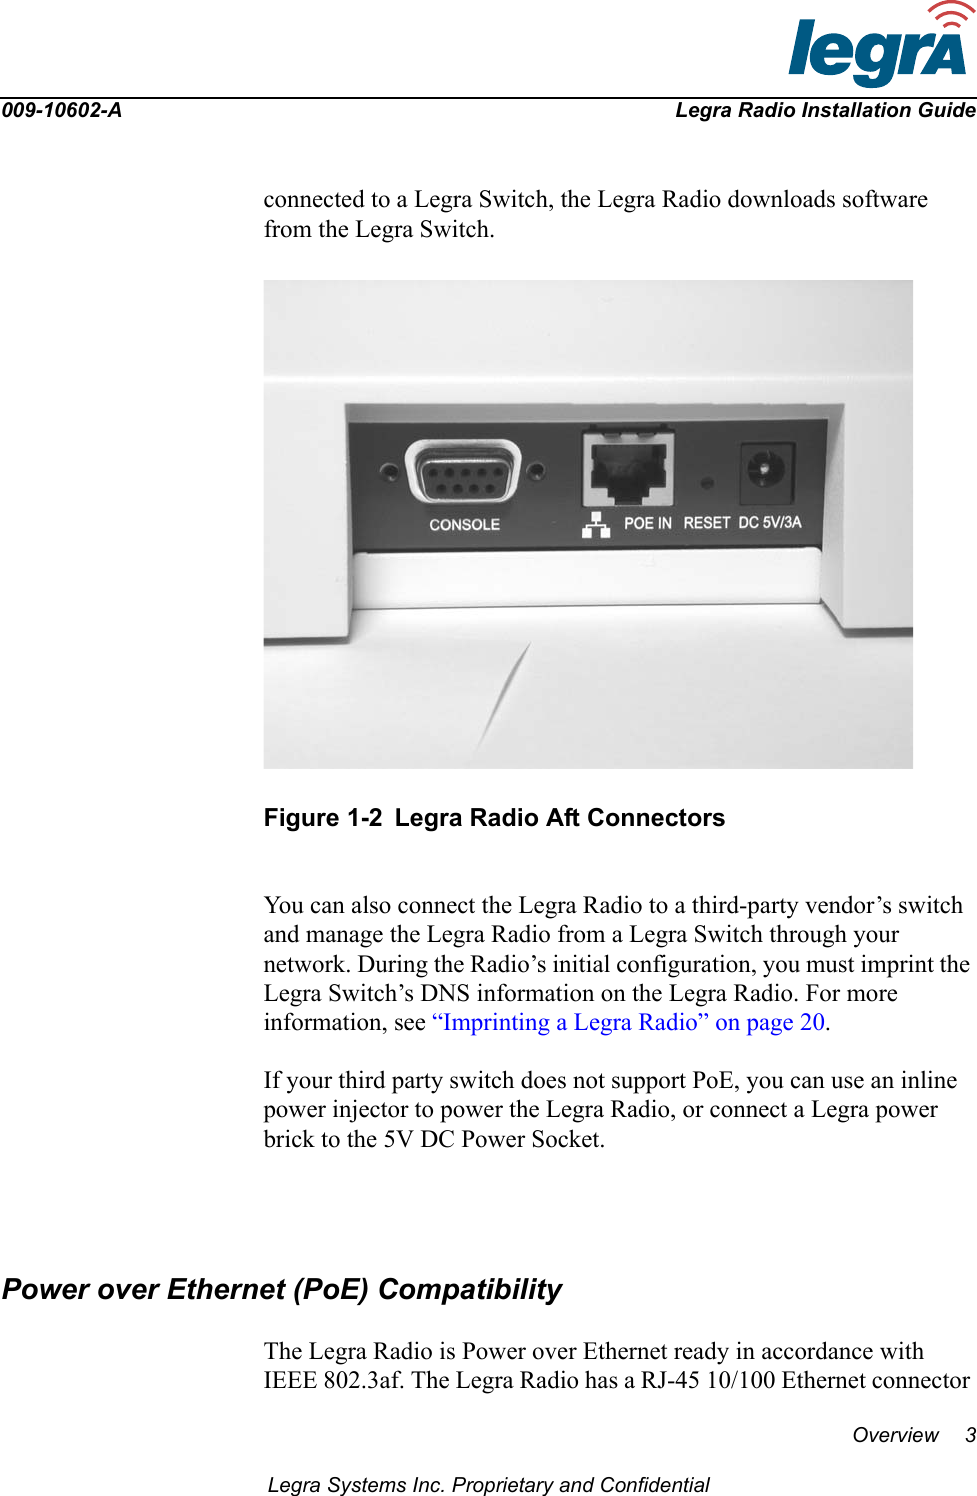 009-10602-A Legra Radio Installation GuideOverview 3Legra Systems Inc. Proprietary and Confidentialconnected to a Legra Switch, the Legra Radio downloads software from the Legra Switch. Figure 1-2 Legra Radio Aft ConnectorsYou can also connect the Legra Radio to a third-party vendor’s switch and manage the Legra Radio from a Legra Switch through your network. During the Radio’s initial configuration, you must imprint the Legra Switch’s DNS information on the Legra Radio. For more information, see “Imprinting a Legra Radio” on page 20.If your third party switch does not support PoE, you can use an inline power injector to power the Legra Radio, or connect a Legra power brick to the 5V DC Power Socket.Power over Ethernet (PoE) CompatibilityThe Legra Radio is Power over Ethernet ready in accordance with IEEE 802.3af. The Legra Radio has a RJ-45 10/100 Ethernet connector 